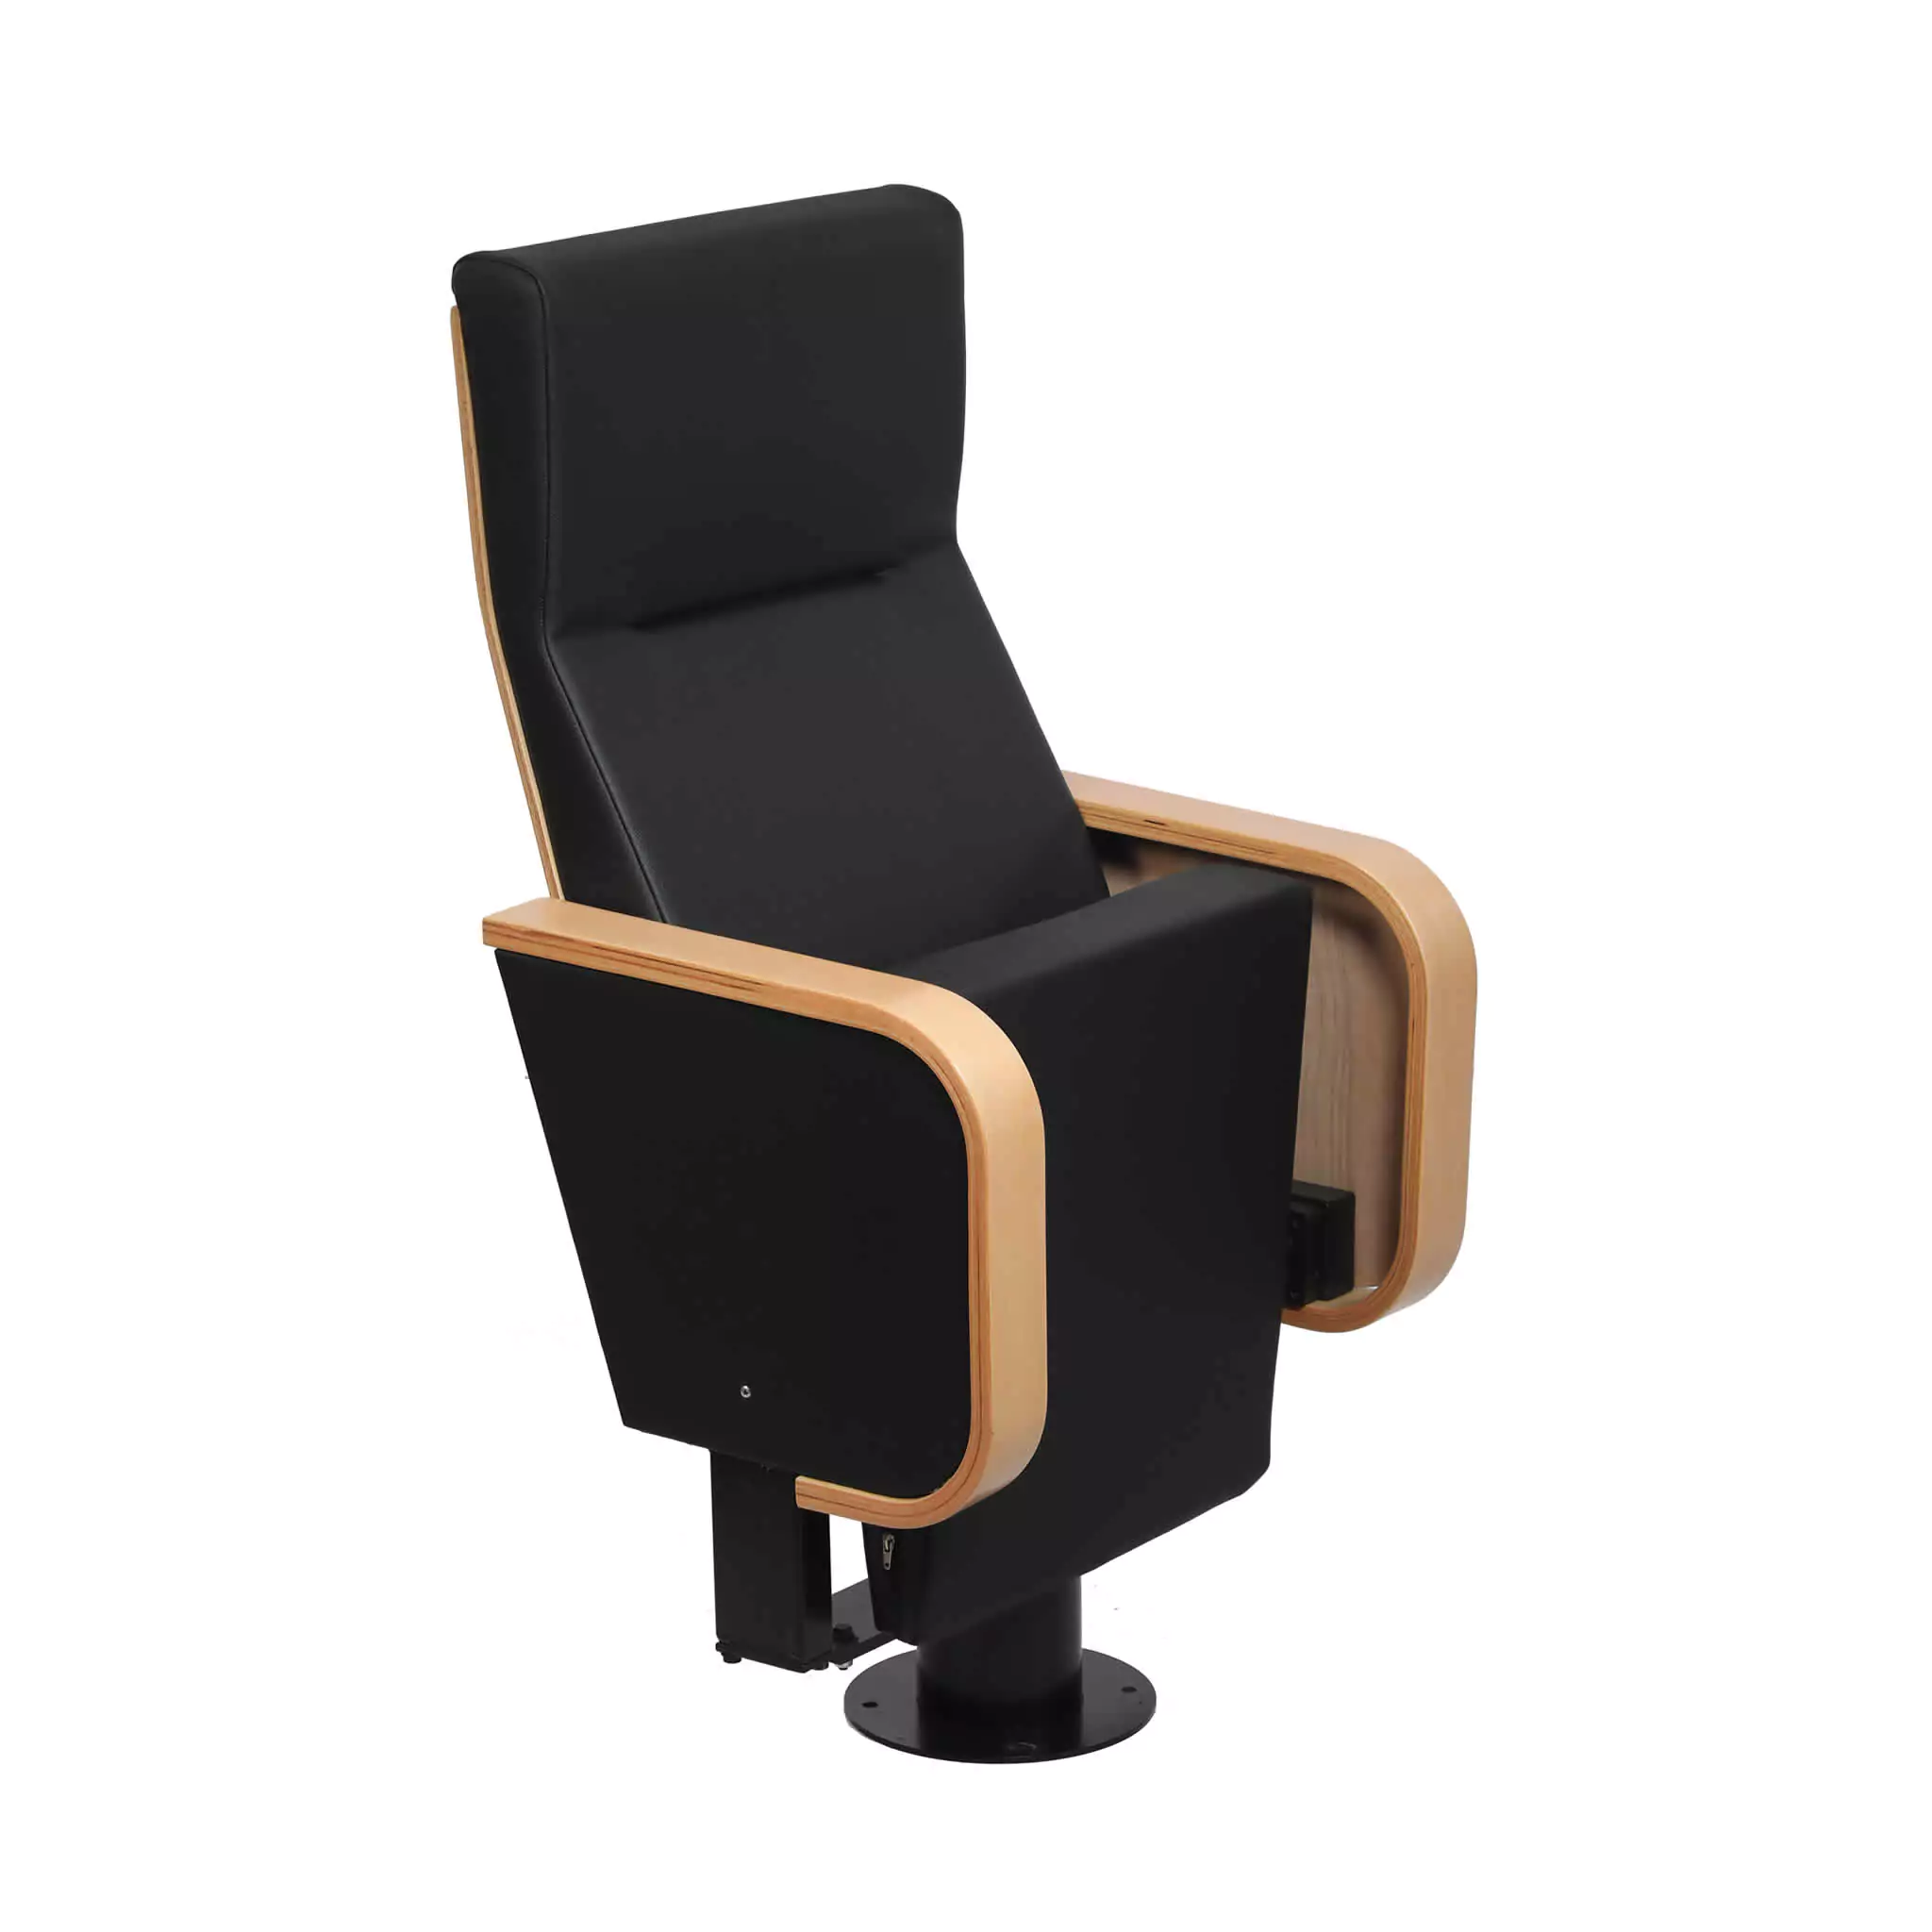 Simko Seating Product Conference Seat Sunstone